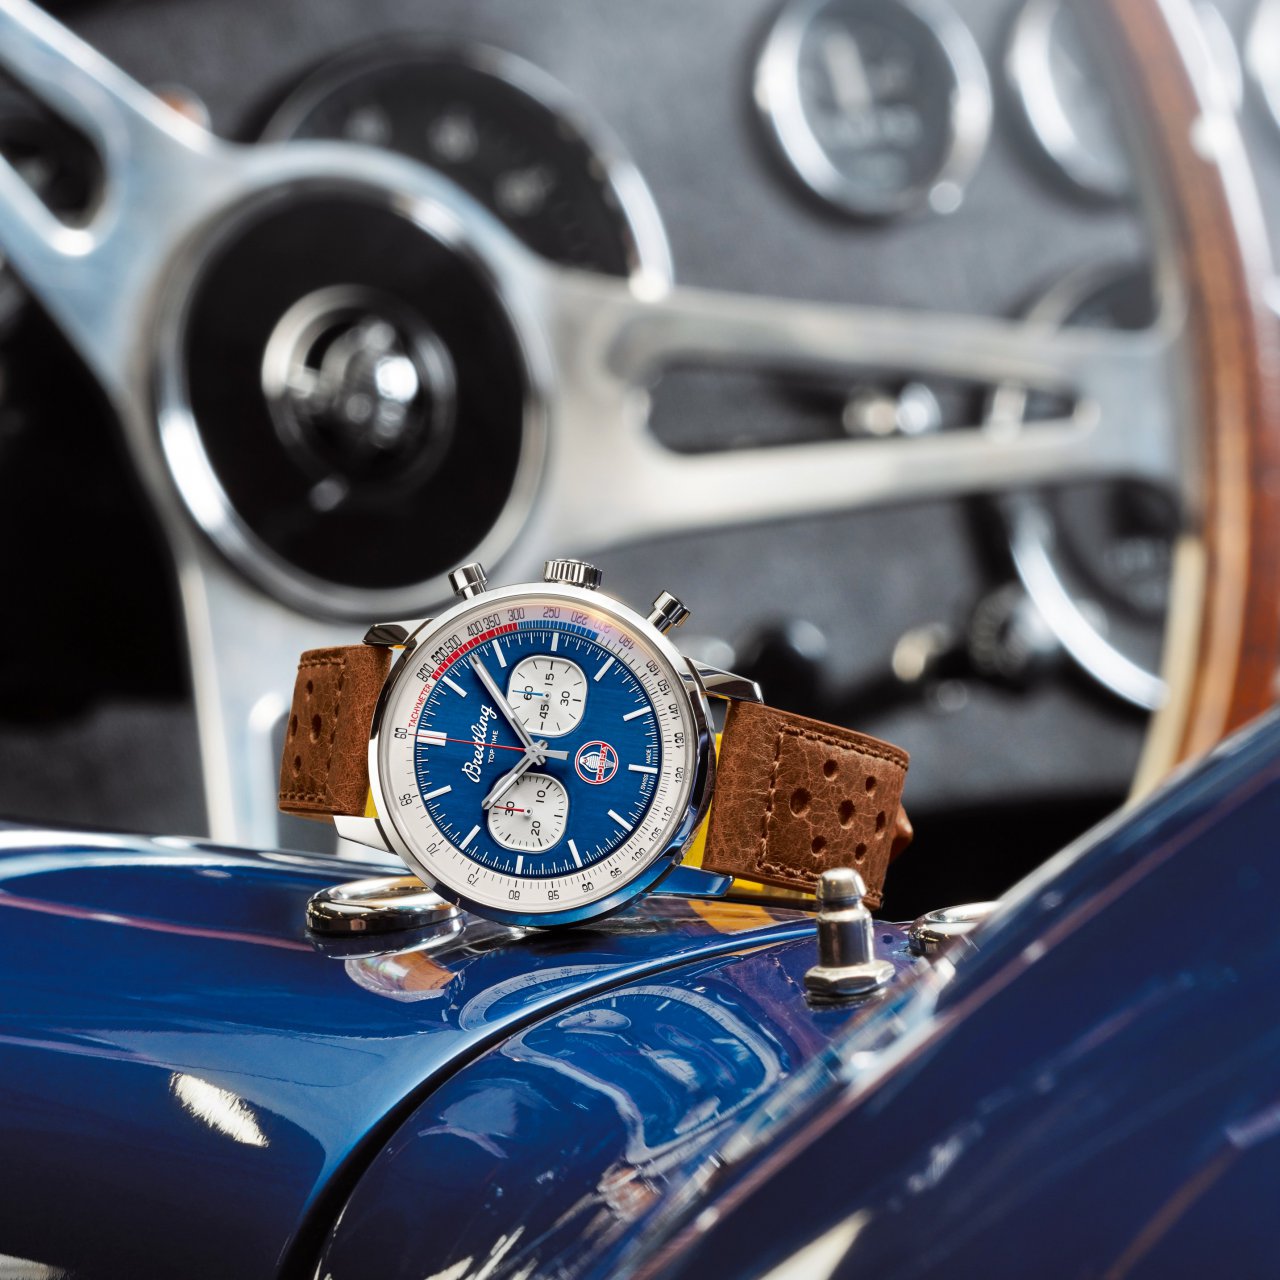 watches, Breitling recalls ‘60s Corvette, Mustang, Cobra with new watches, ClassicCars.com Journal